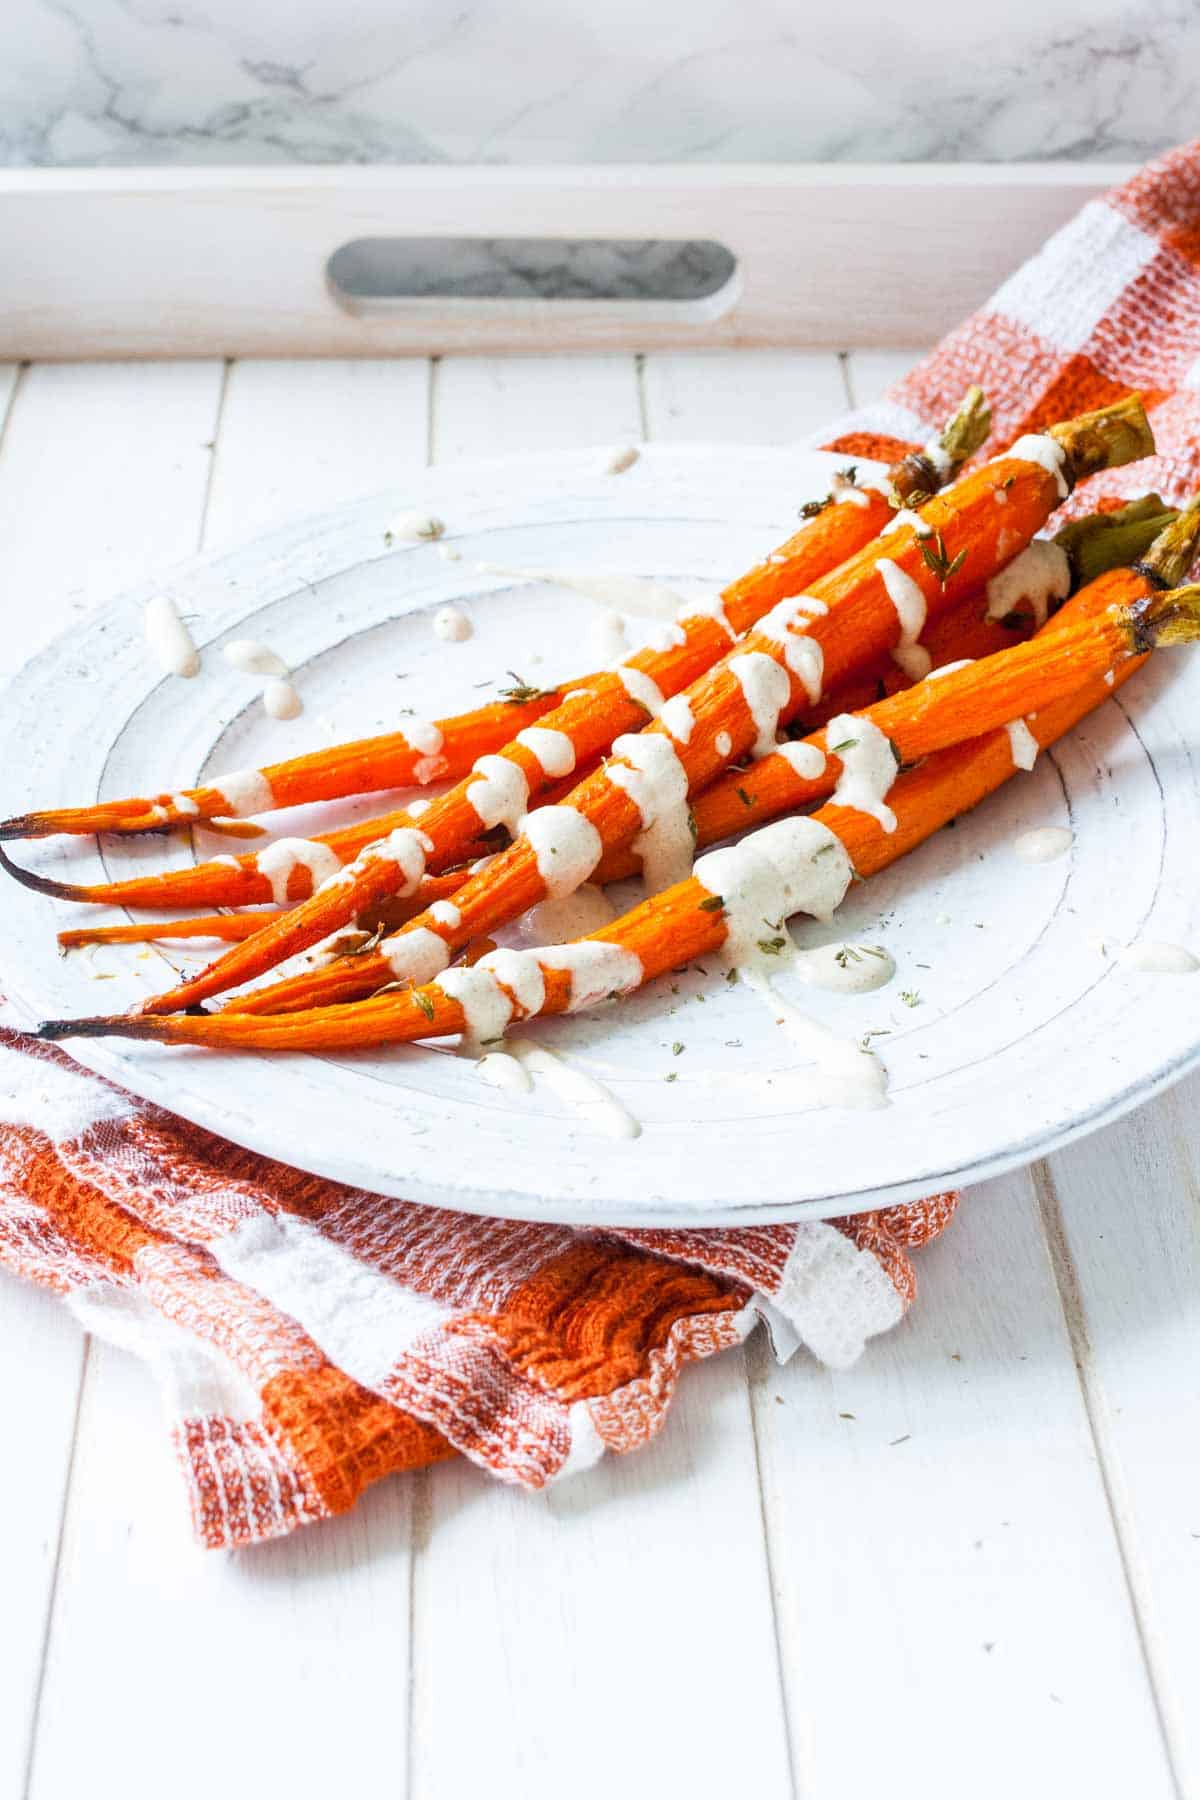 Smoky maple roasted carrots on a white plate drizzled with a creamy dressing